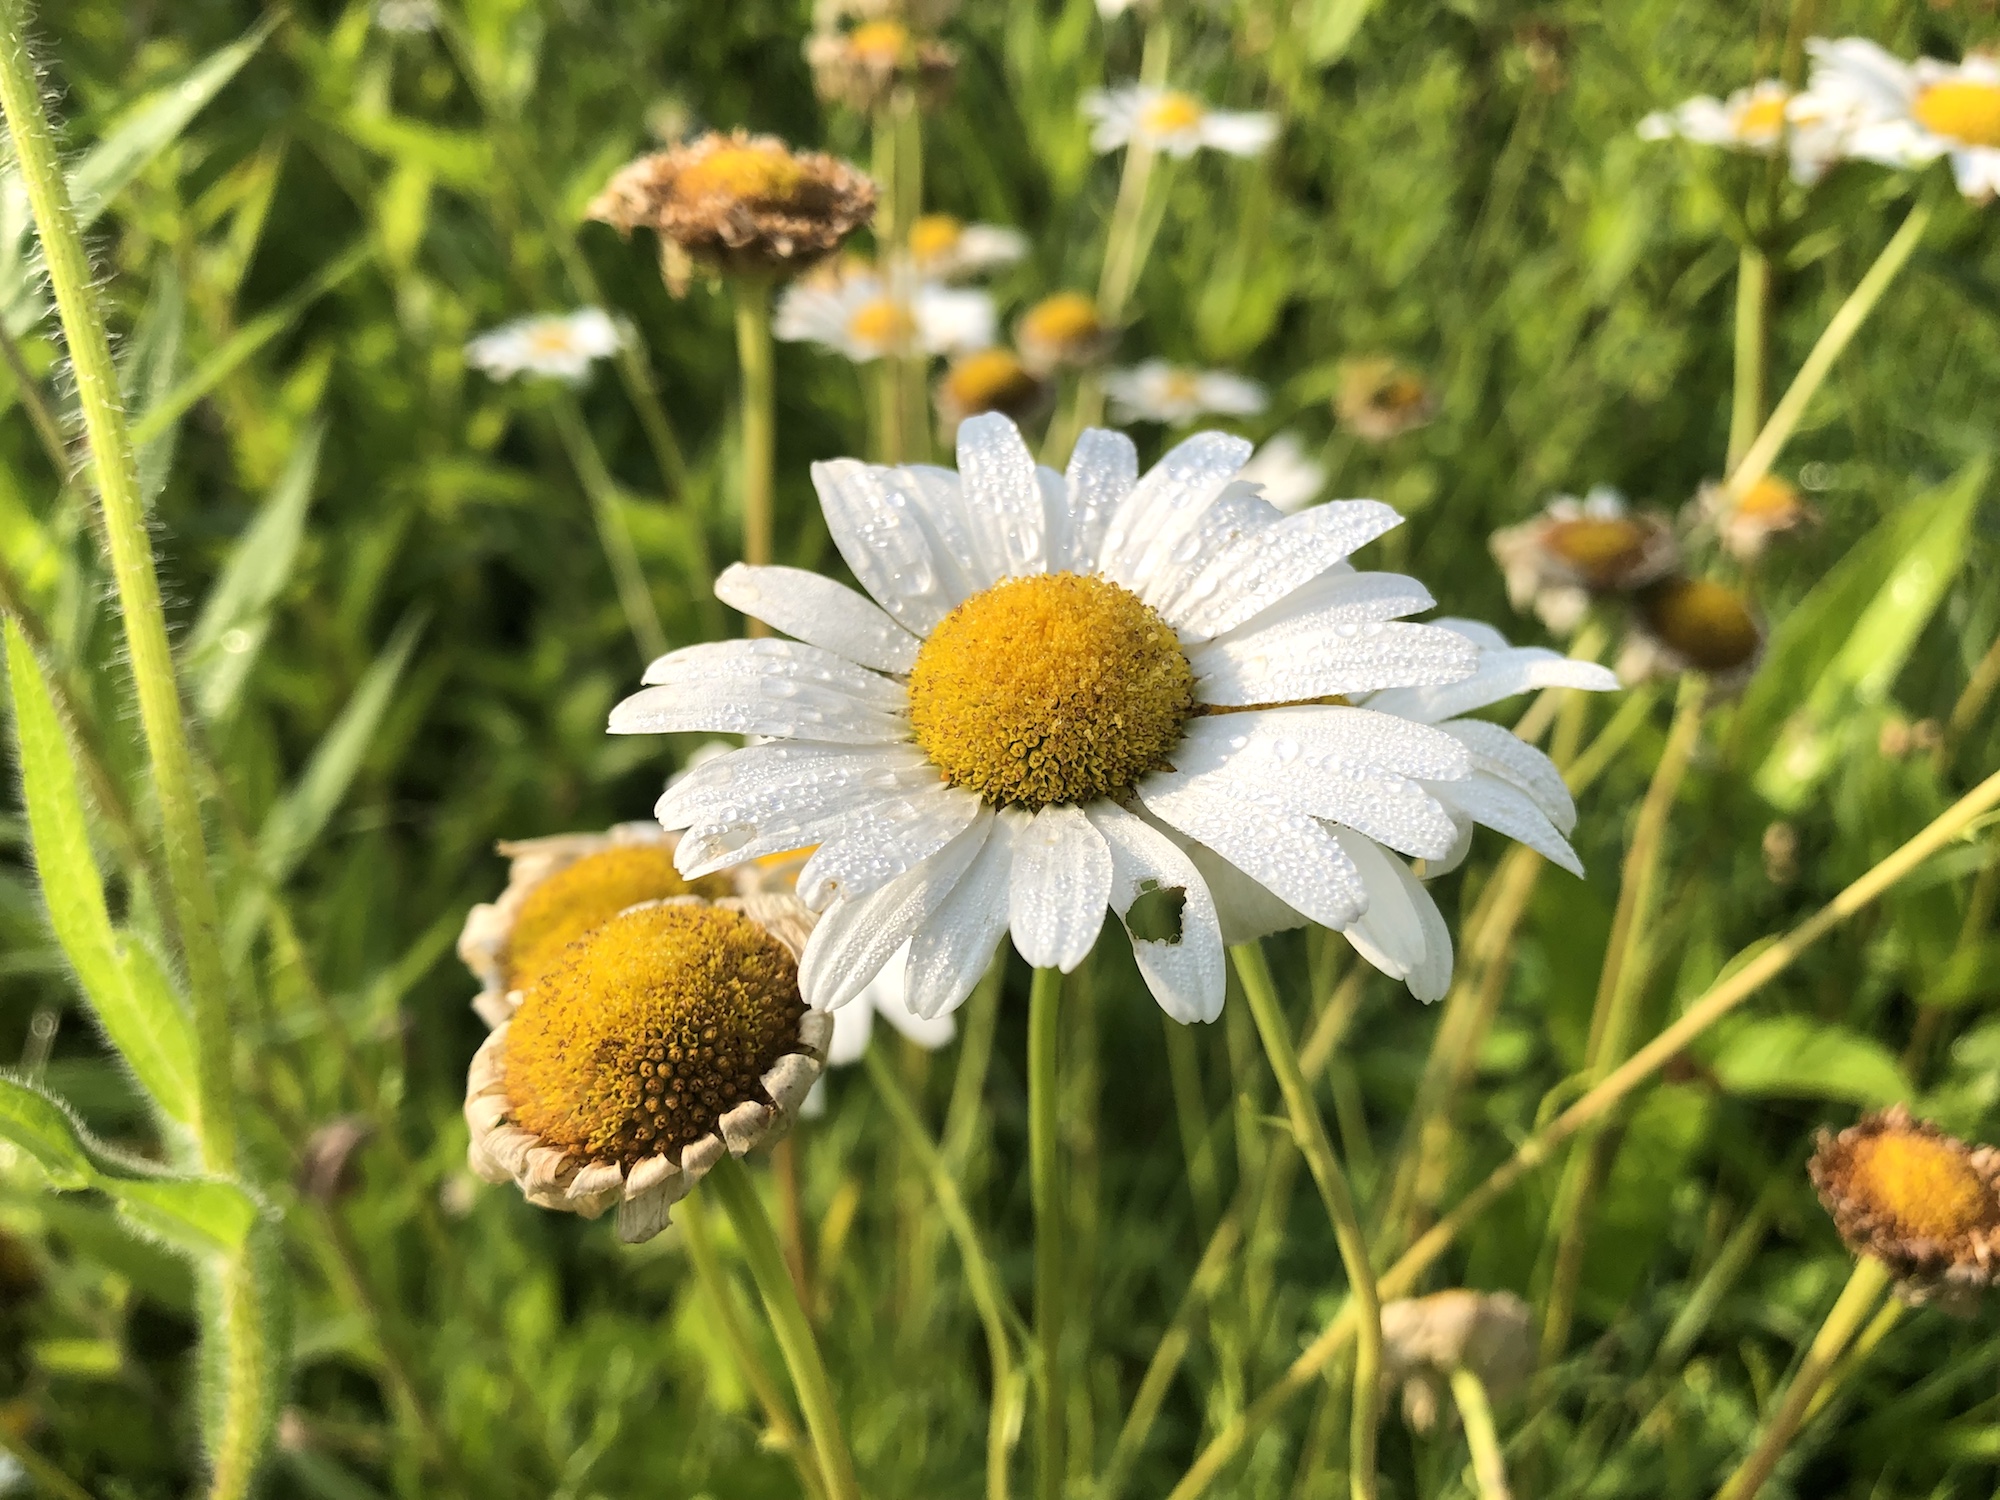 Ox-eye Daisies on bank of retaining pond at the corner of Manitou Way and Nakoma Road in Madison, Wisconsin on July 9, 2019.